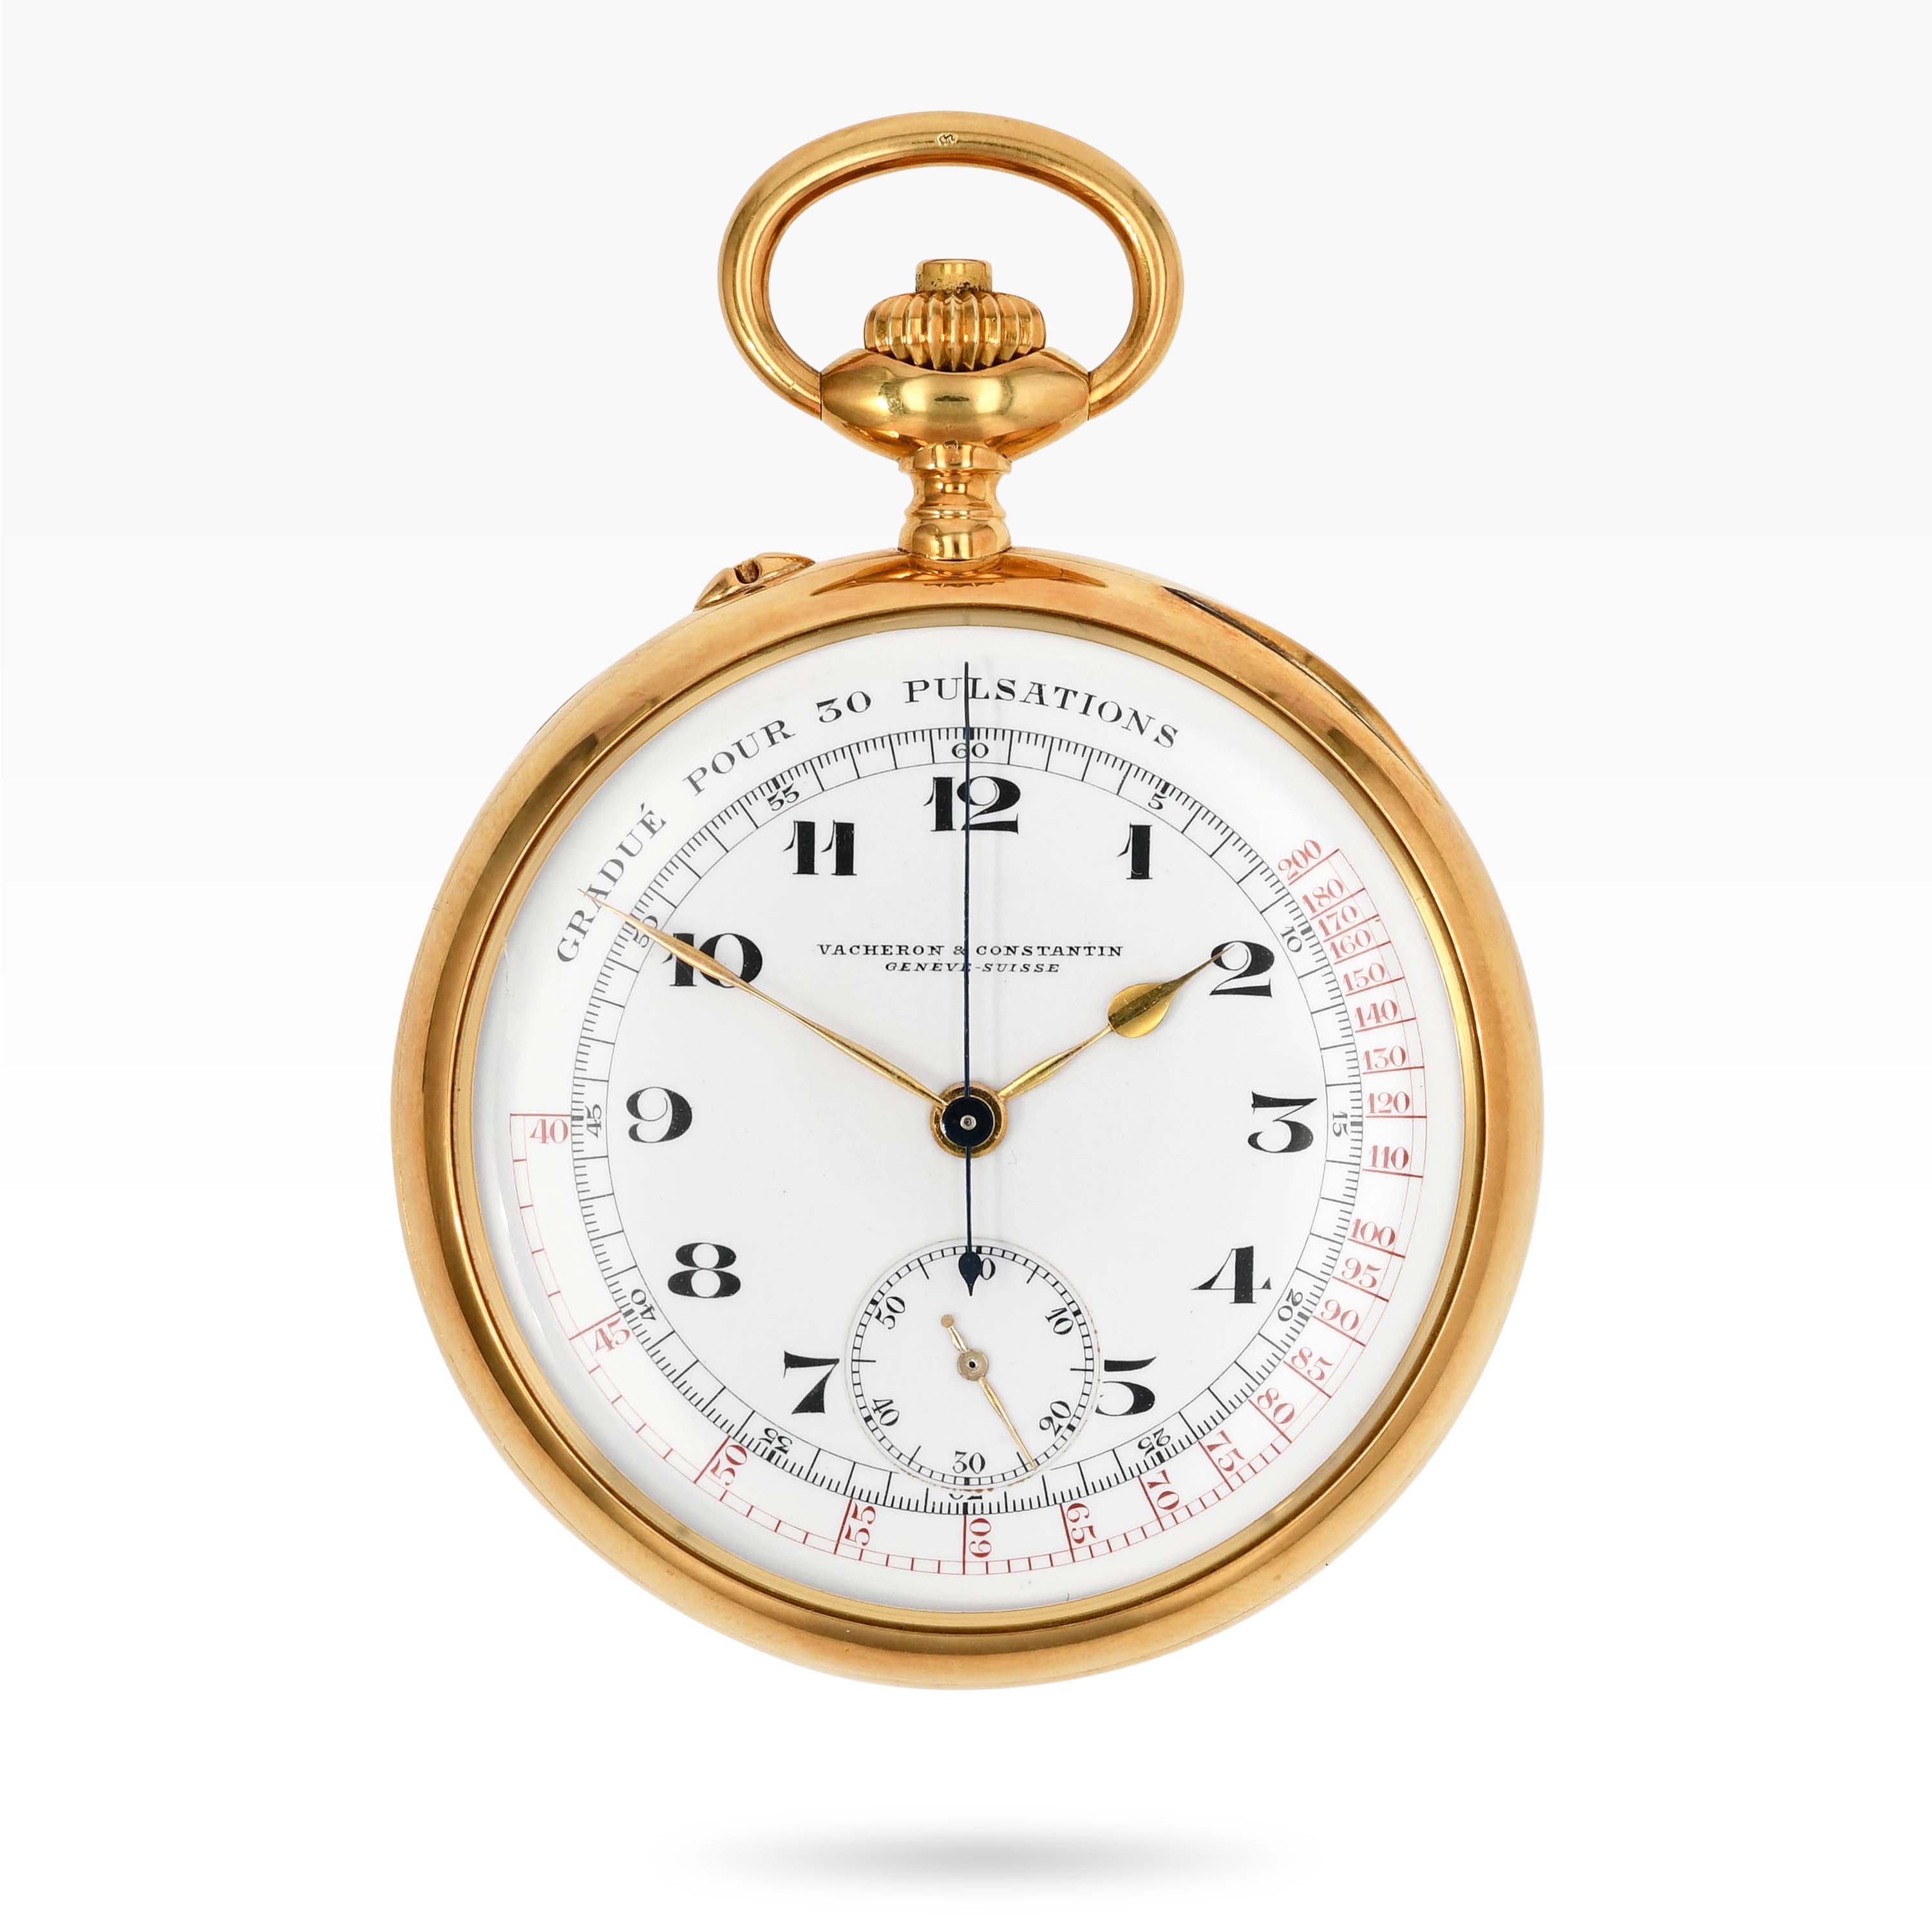 Vacheron Constantin Doctor’s pocket watch, chronograph, pulsometer scale, enamel dial in yellow gold img main1